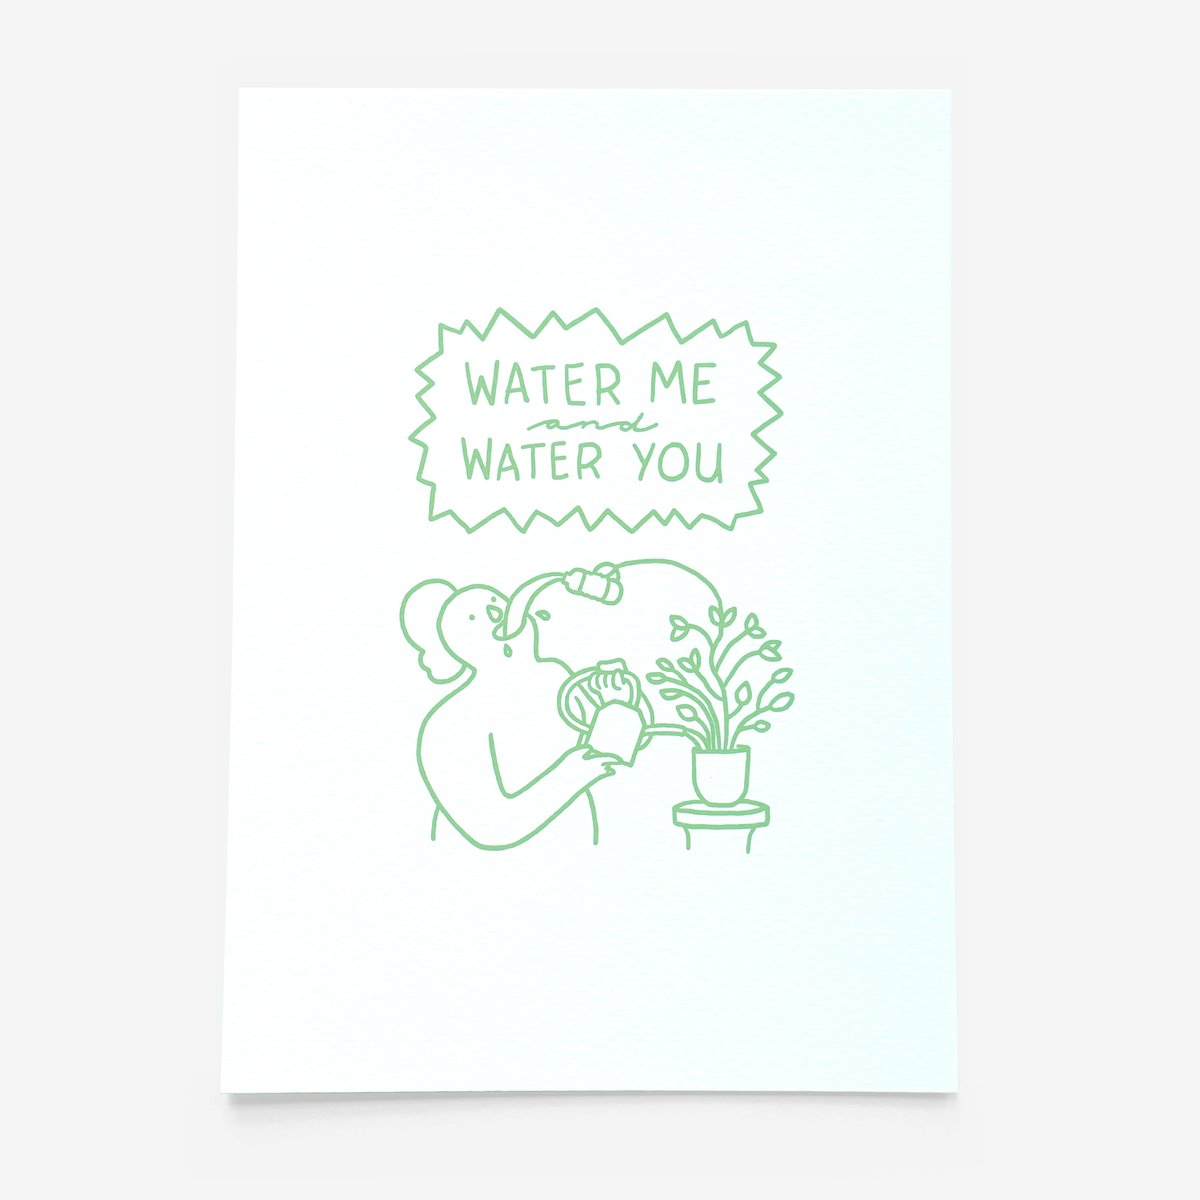 Image of "Water Me & Water You" Print